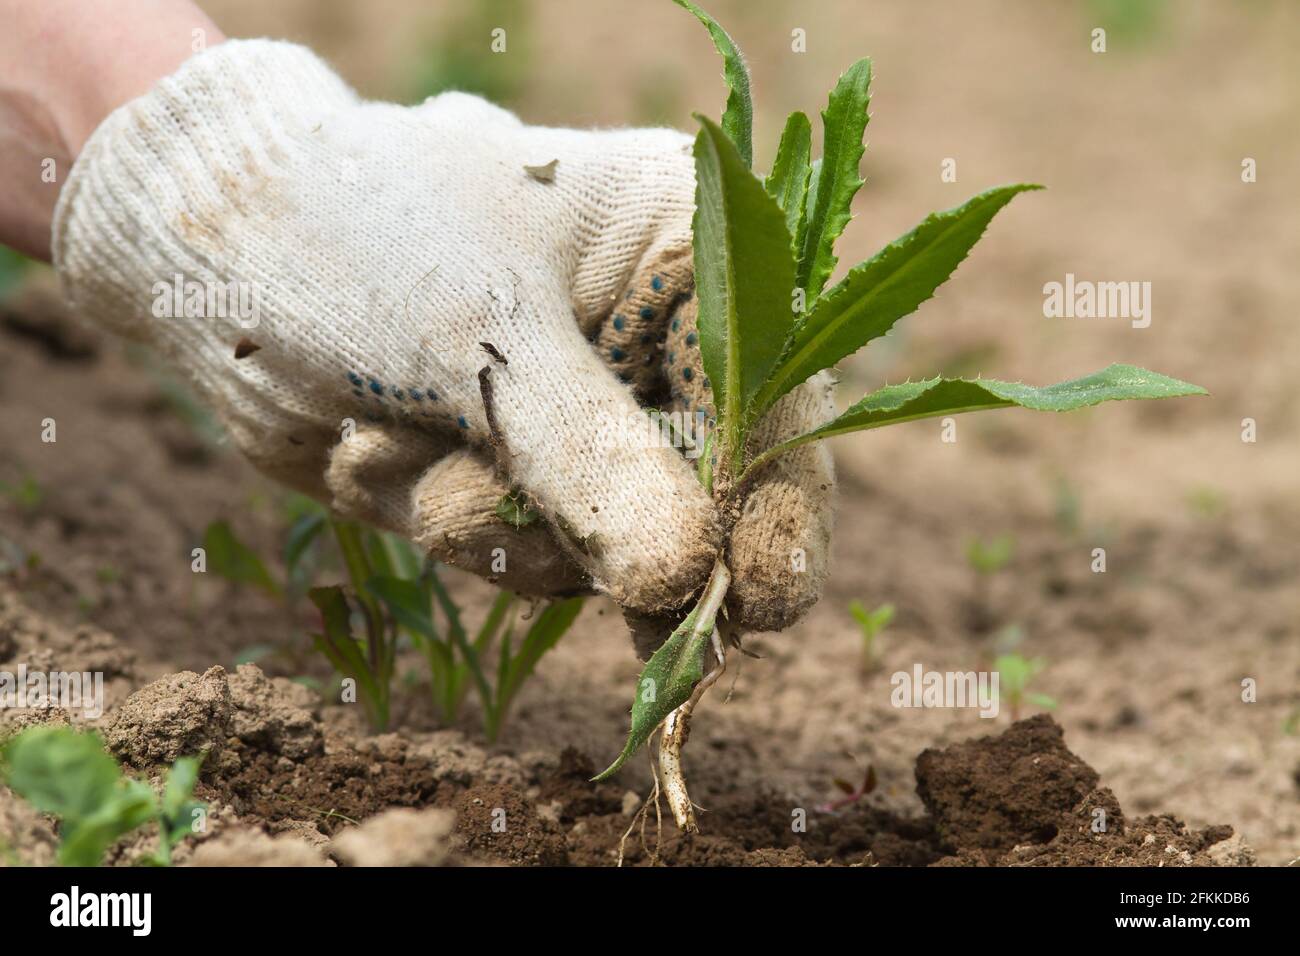 a gloved hand of the gardener holds a weed (sow thistle) plucked from the ground, closeup Stock Photo